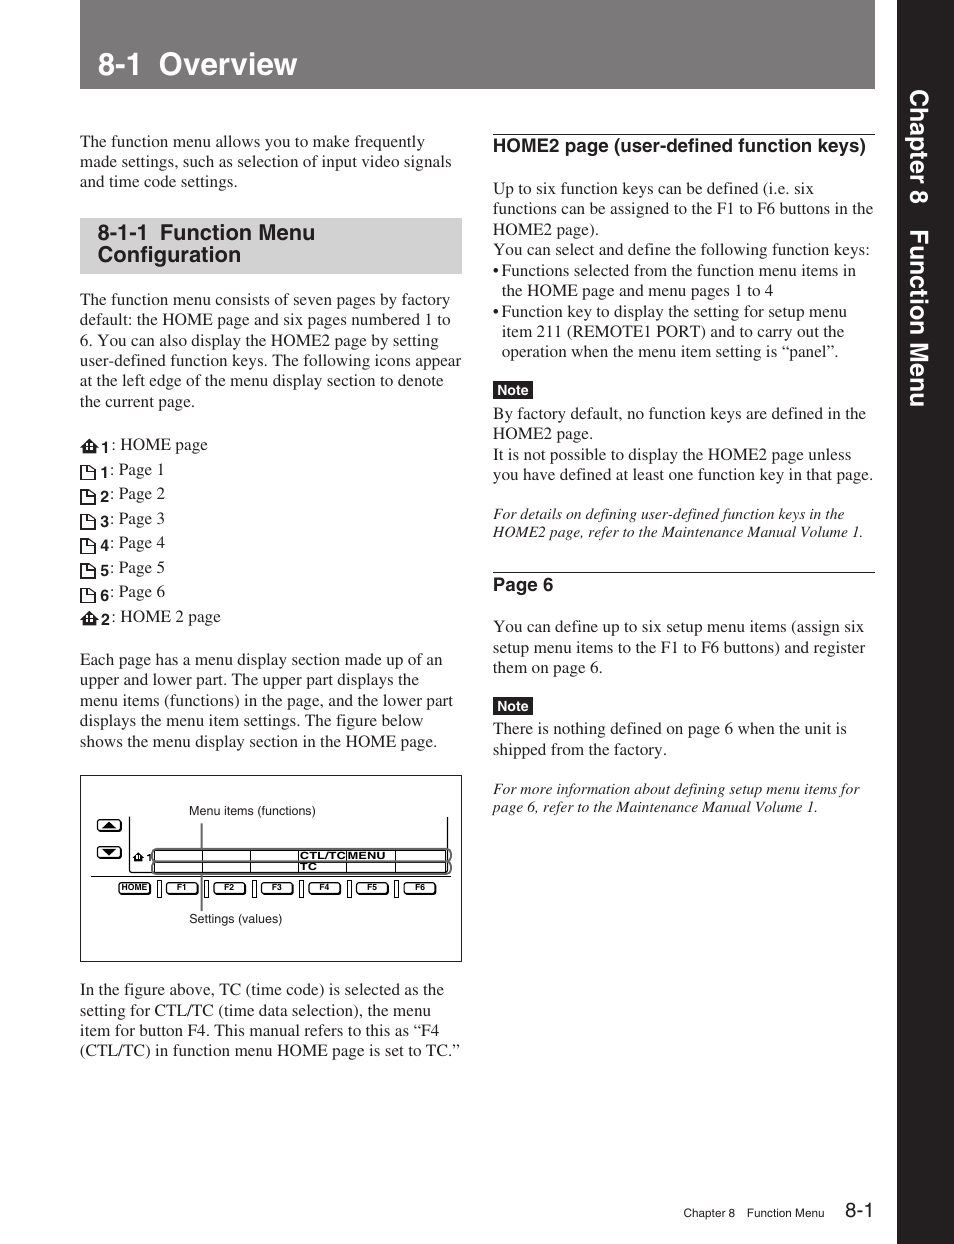 Chapter 8 function menu, 1 overview, 1-1 function menu configuration | Chapter 8 function men u | Sony HDW-M2100 User Manual | Page 65 / 115